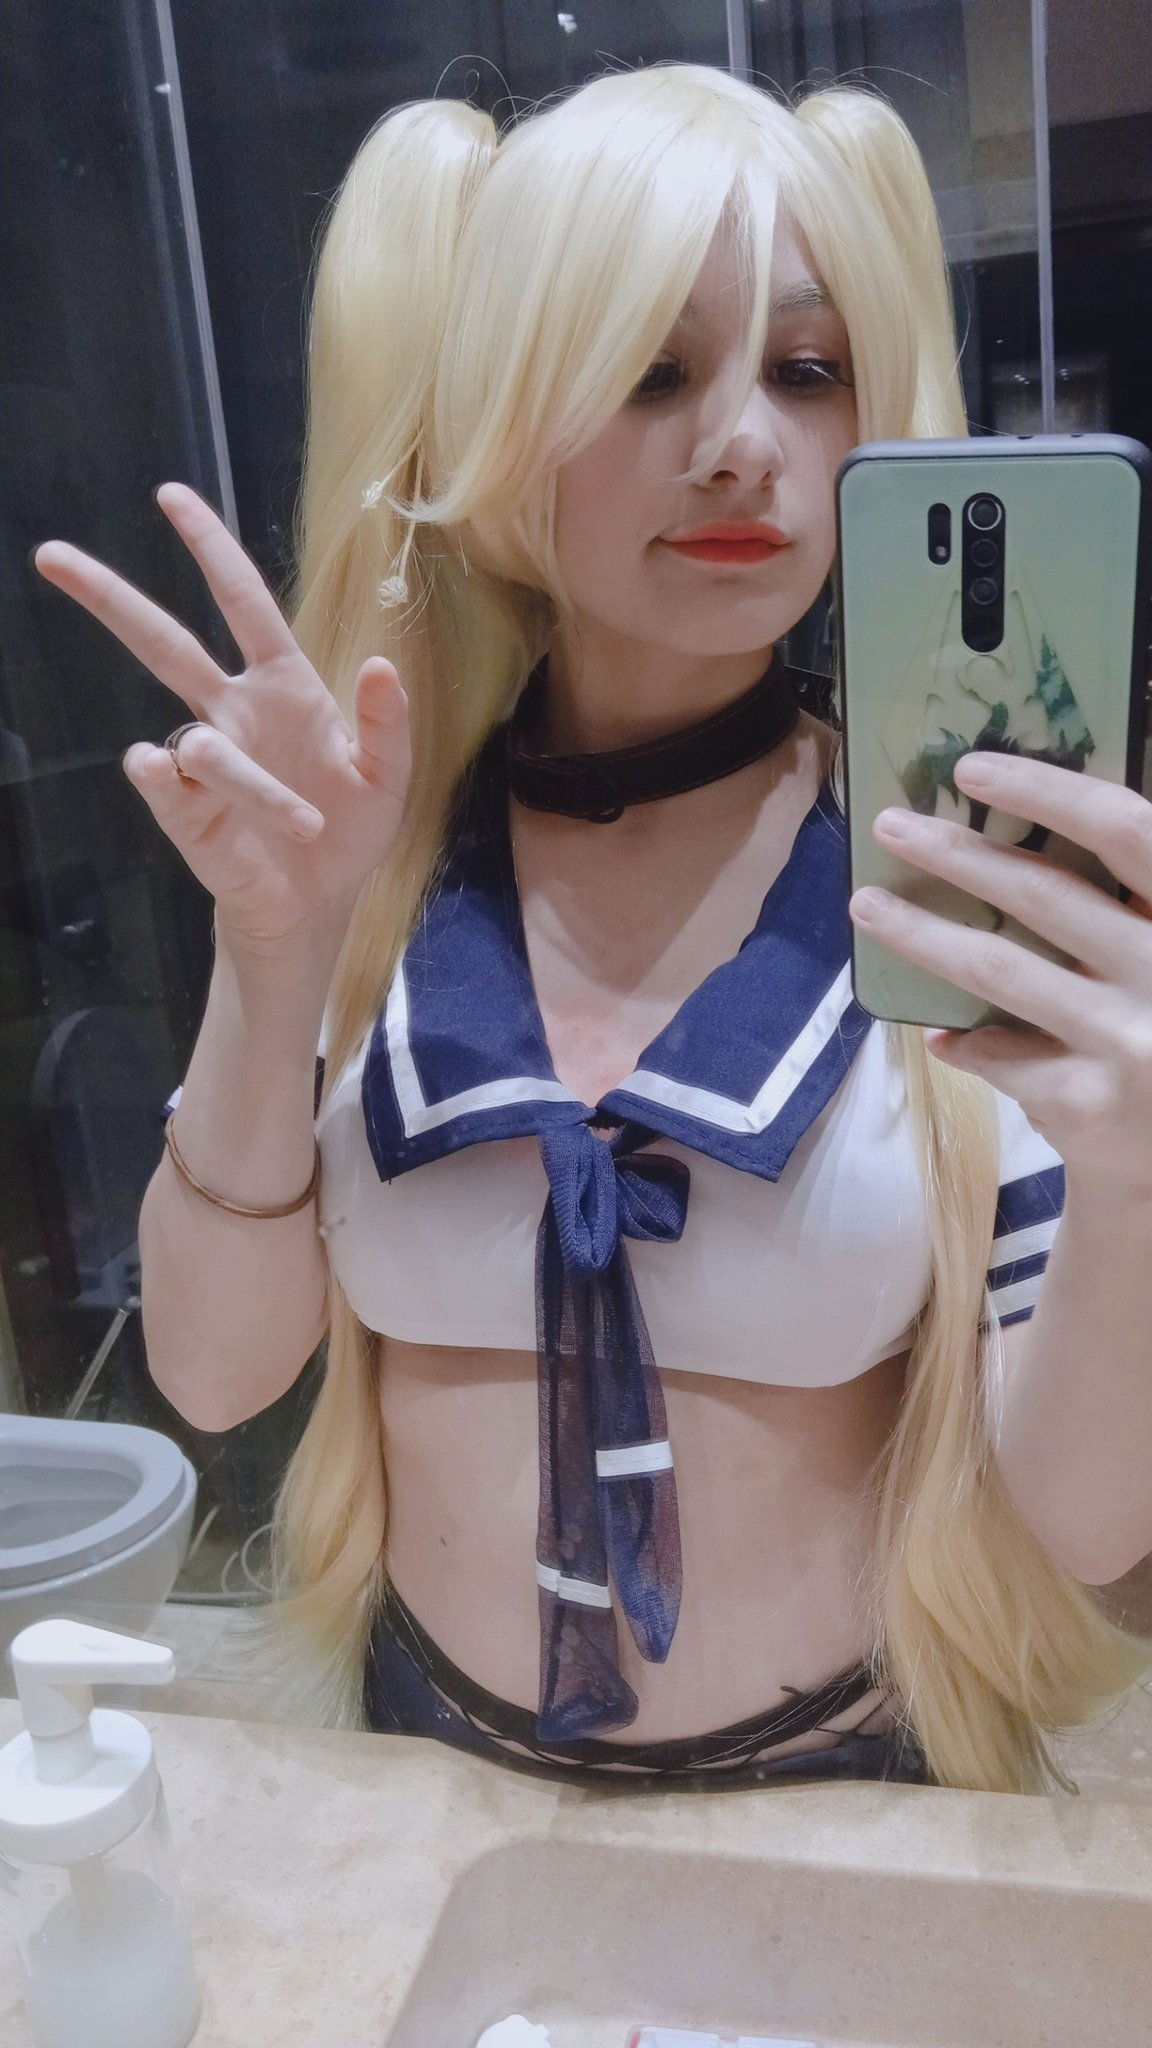 Photo by Ruinedcarpet with the username @Ruinedcarpet,  February 16, 2022 at 12:30 PM. The post is about the topic RC's Mirror Selfies and the text says '#Cute #Soft #PastelGirl #MirrorSelfie #Hot #Young #Pale #Babe #Blonde #Wig #Pigtails #Fishnets #Stockings #Amateur #Selfie #CensoredNipples #Cutie #PaleGirl #Hottie #PastelAesthetic #Beauty #Uniform #Skirt #GfMaterial #Bedroom'